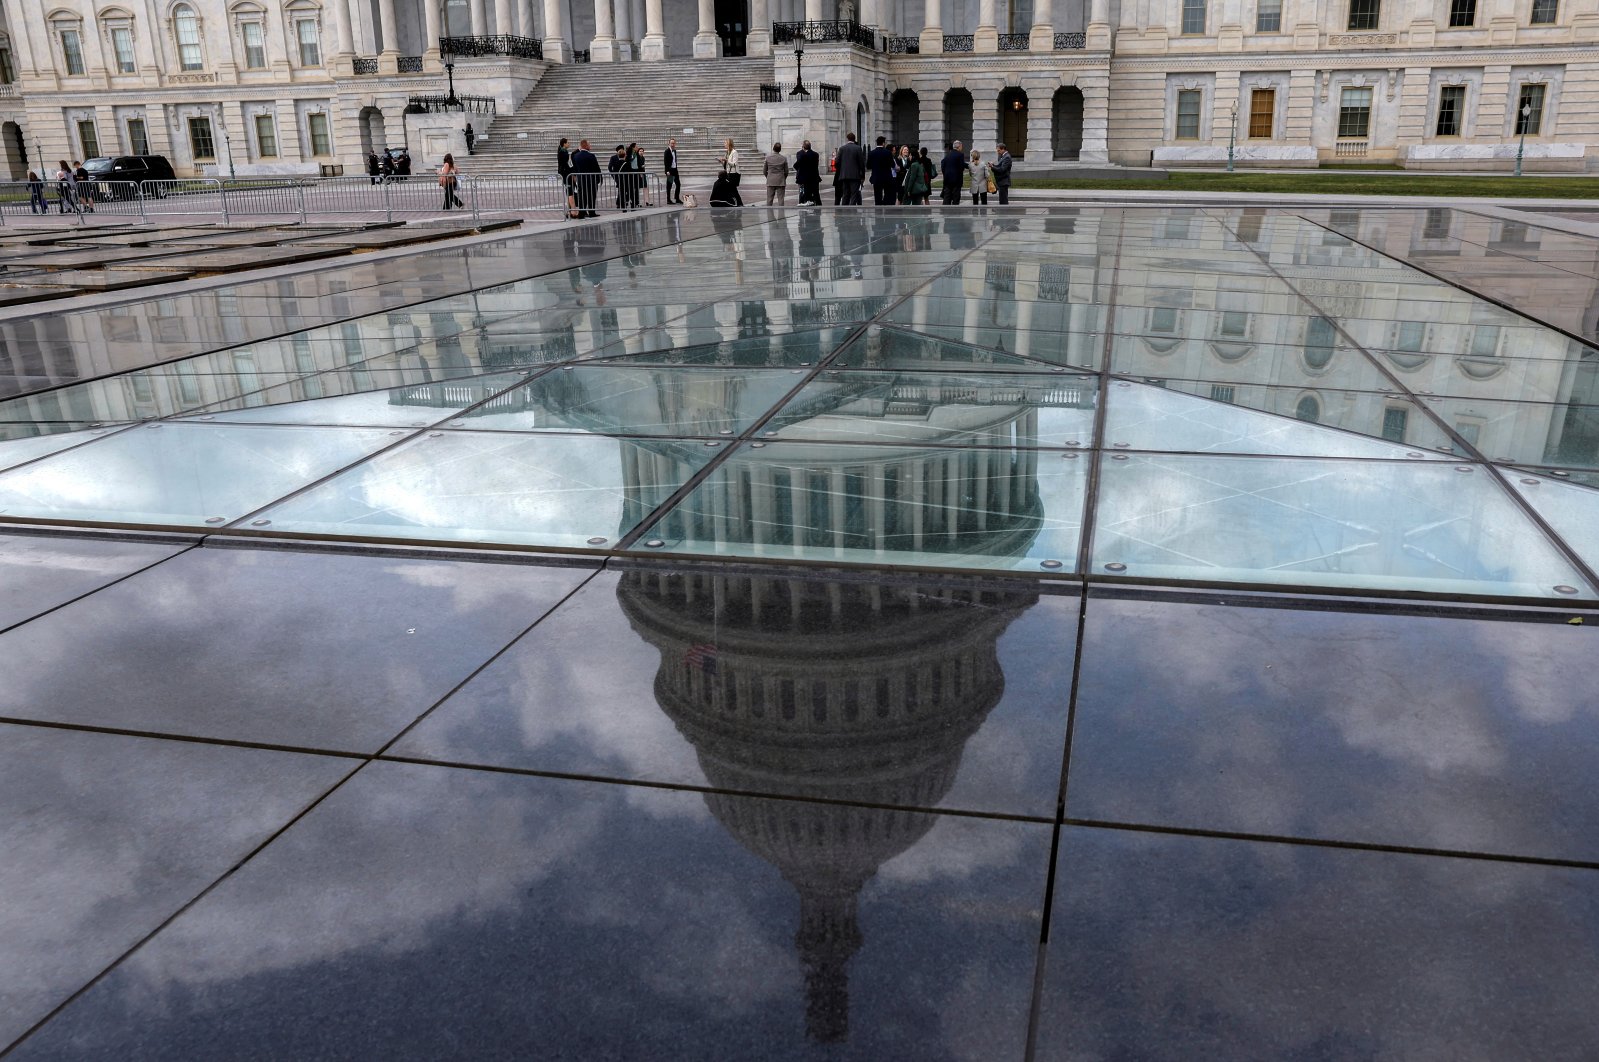 The U.S. Capitol dome is seen in a reflection outside the United States Capitol building in Washington, U.S., Sept. 22, 2023. (Reuters Photo)